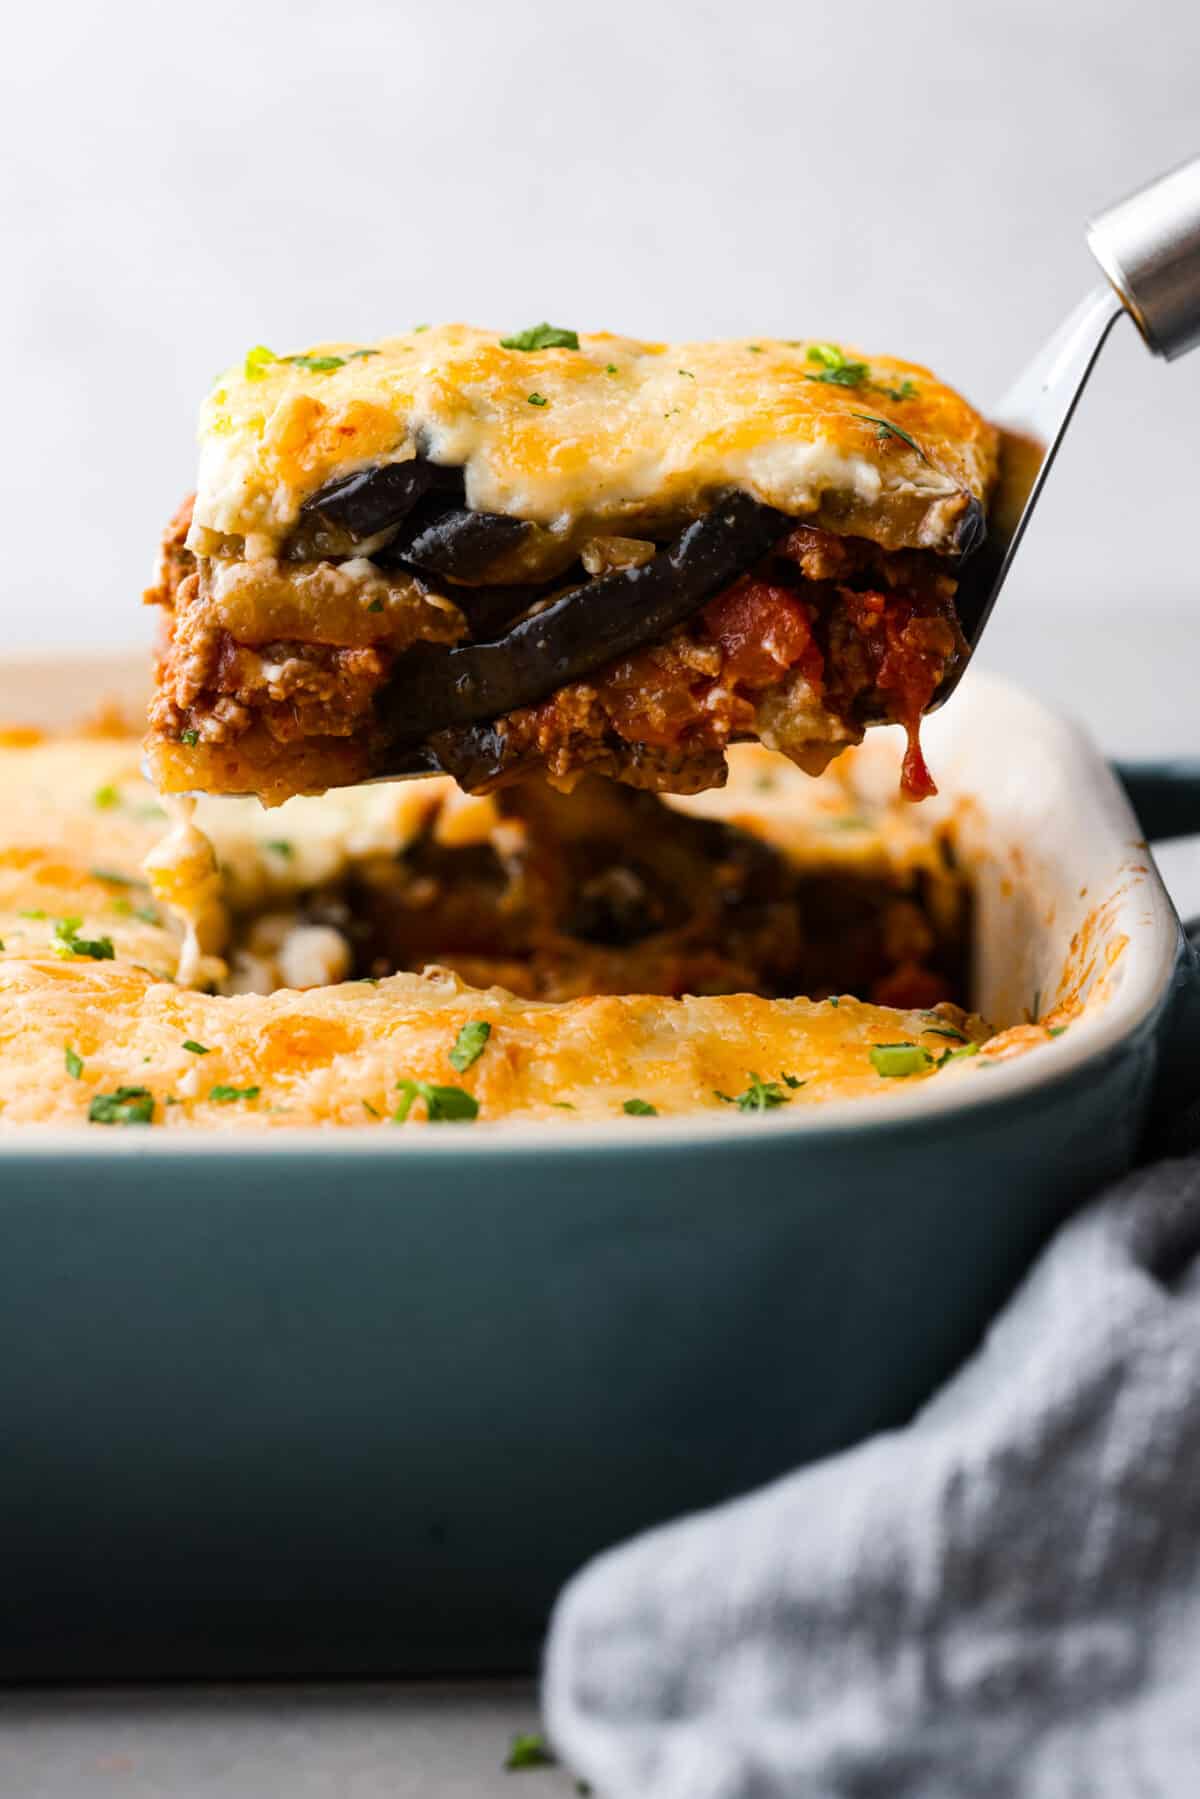 A slice of moussaka being served.